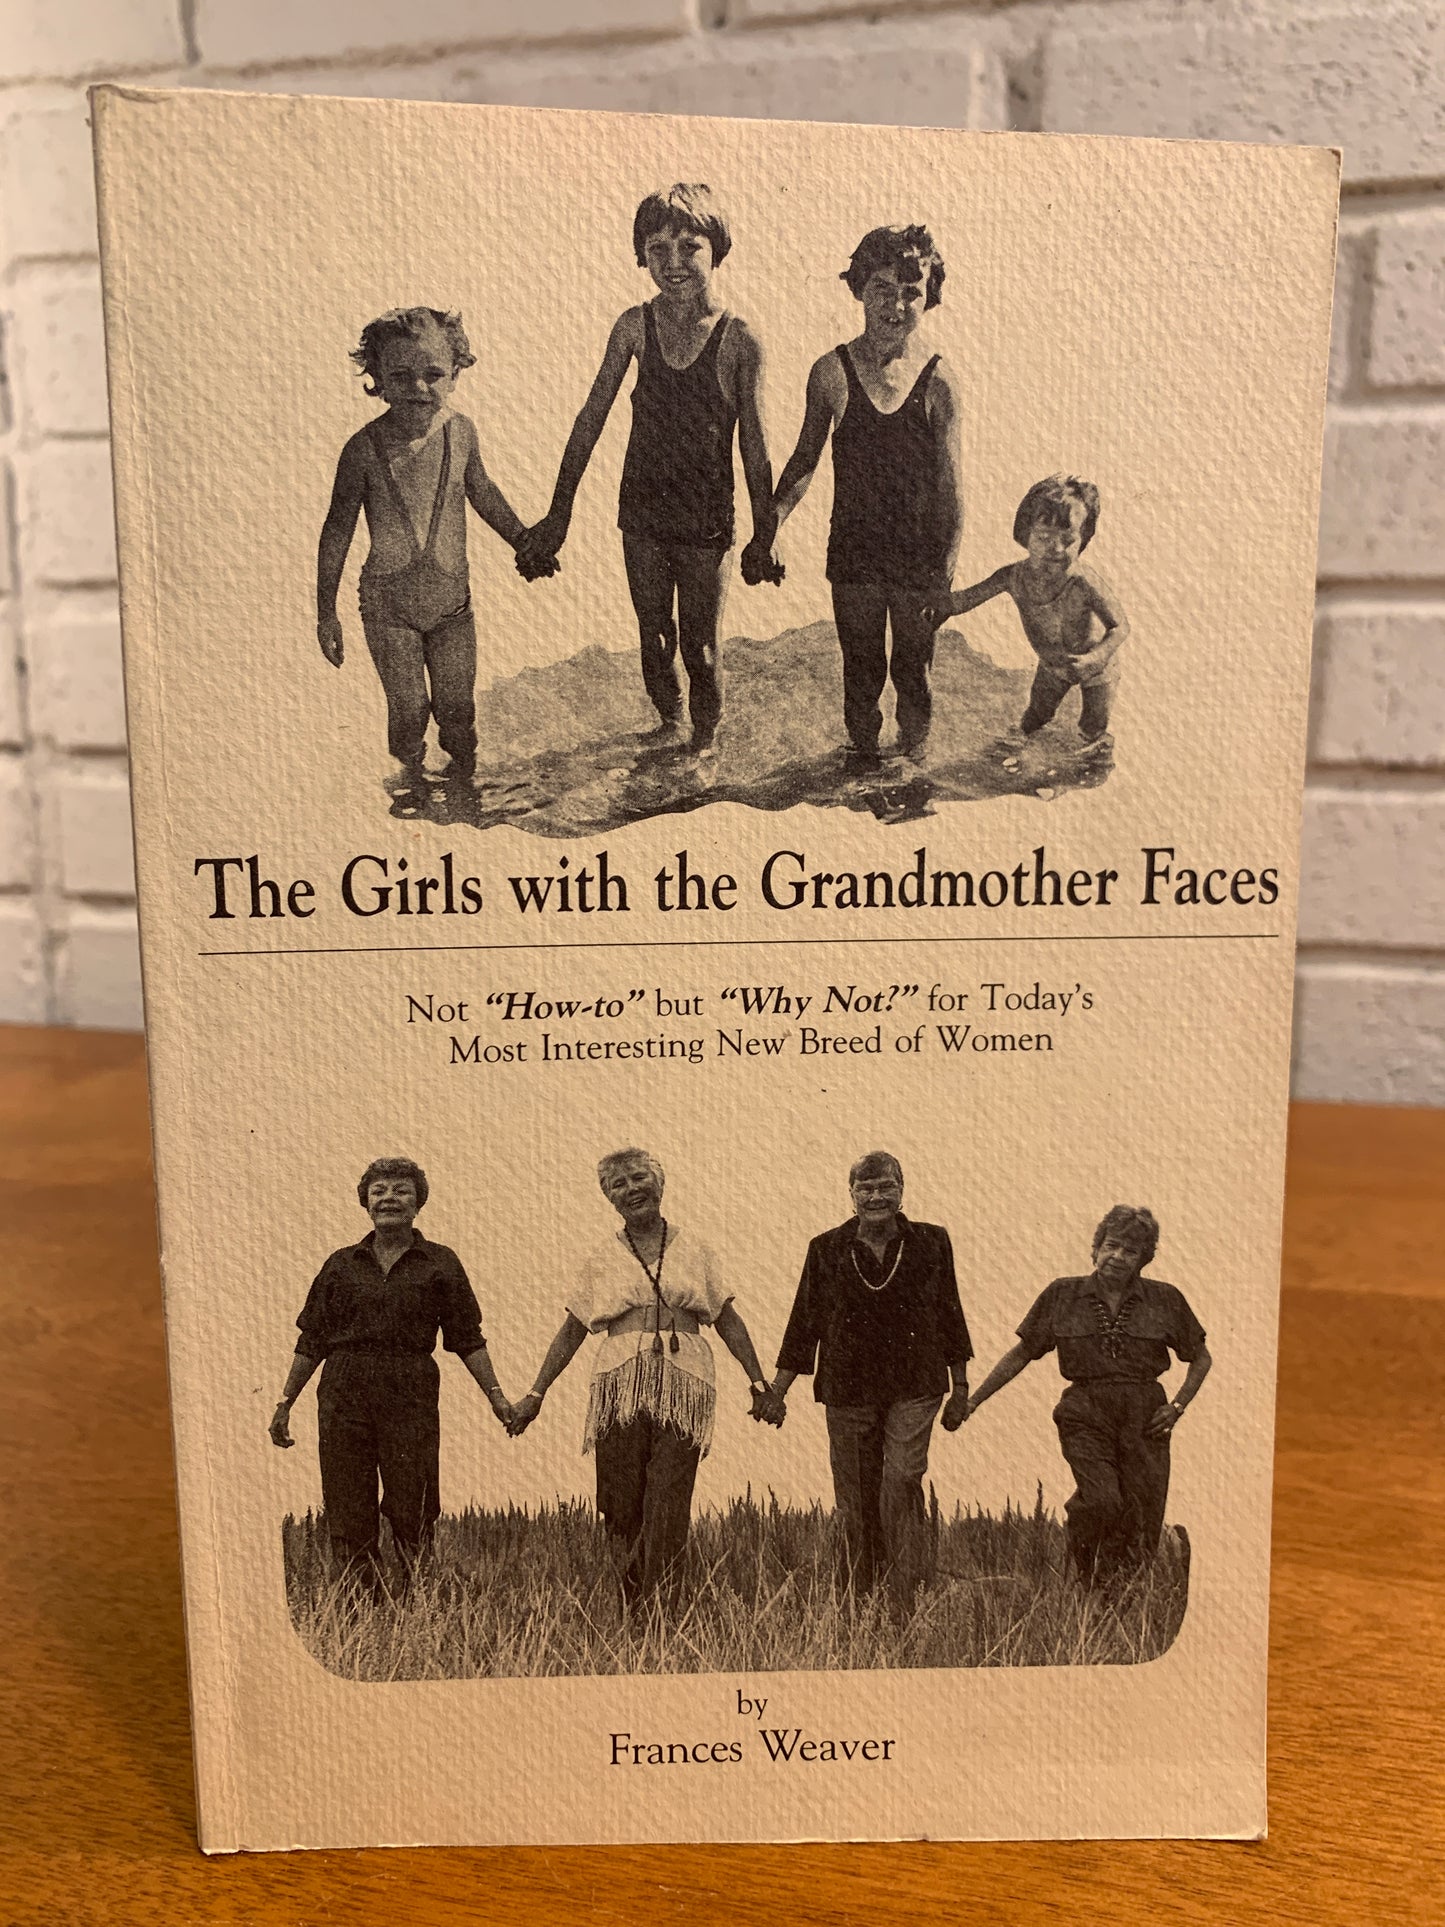 The Girls with the Grandmother Faces by Frances Weaver